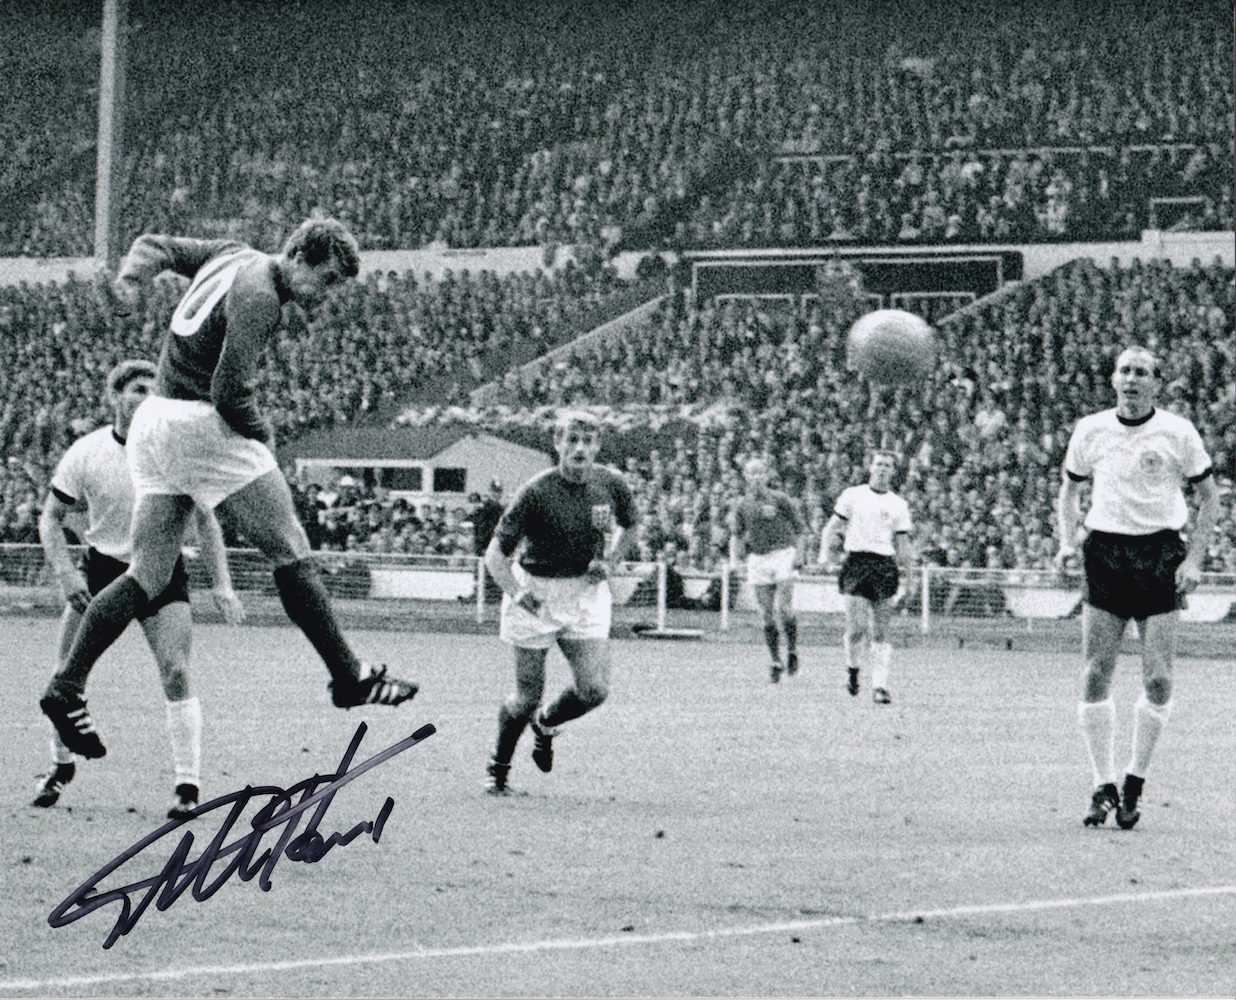 Geoff Hurst 1966 World Cup Winner Signed 10x8 inch Photo. Good condition. All autographs come with a